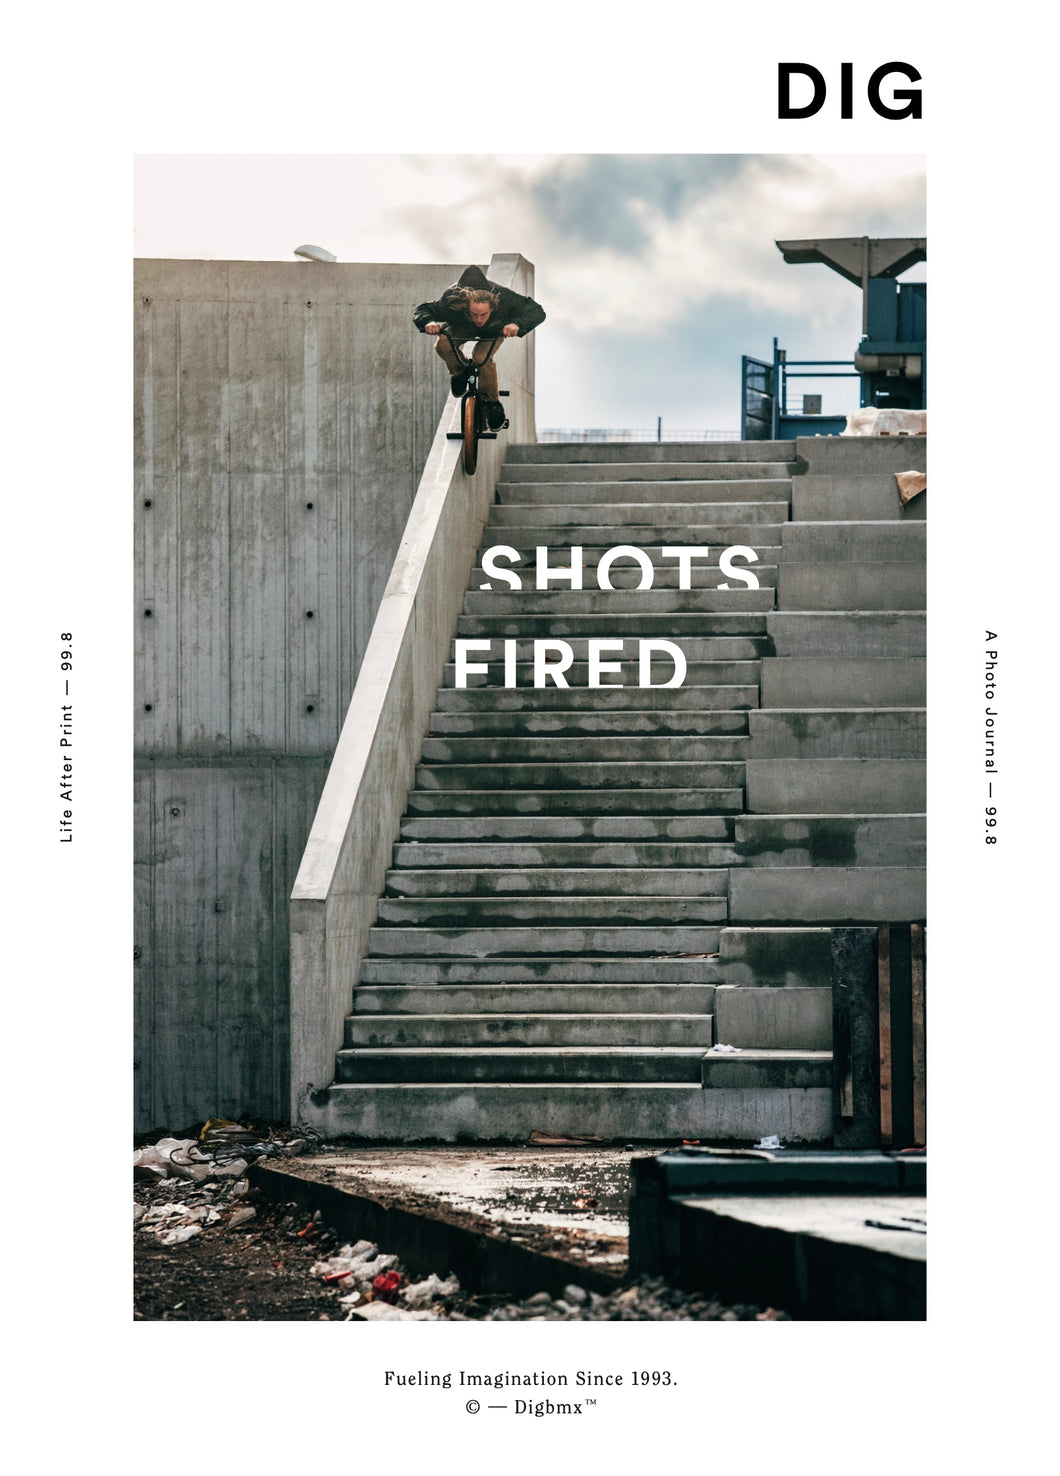 DIG MAGAZINE 99.8 - Life After Print - A Photo Journal